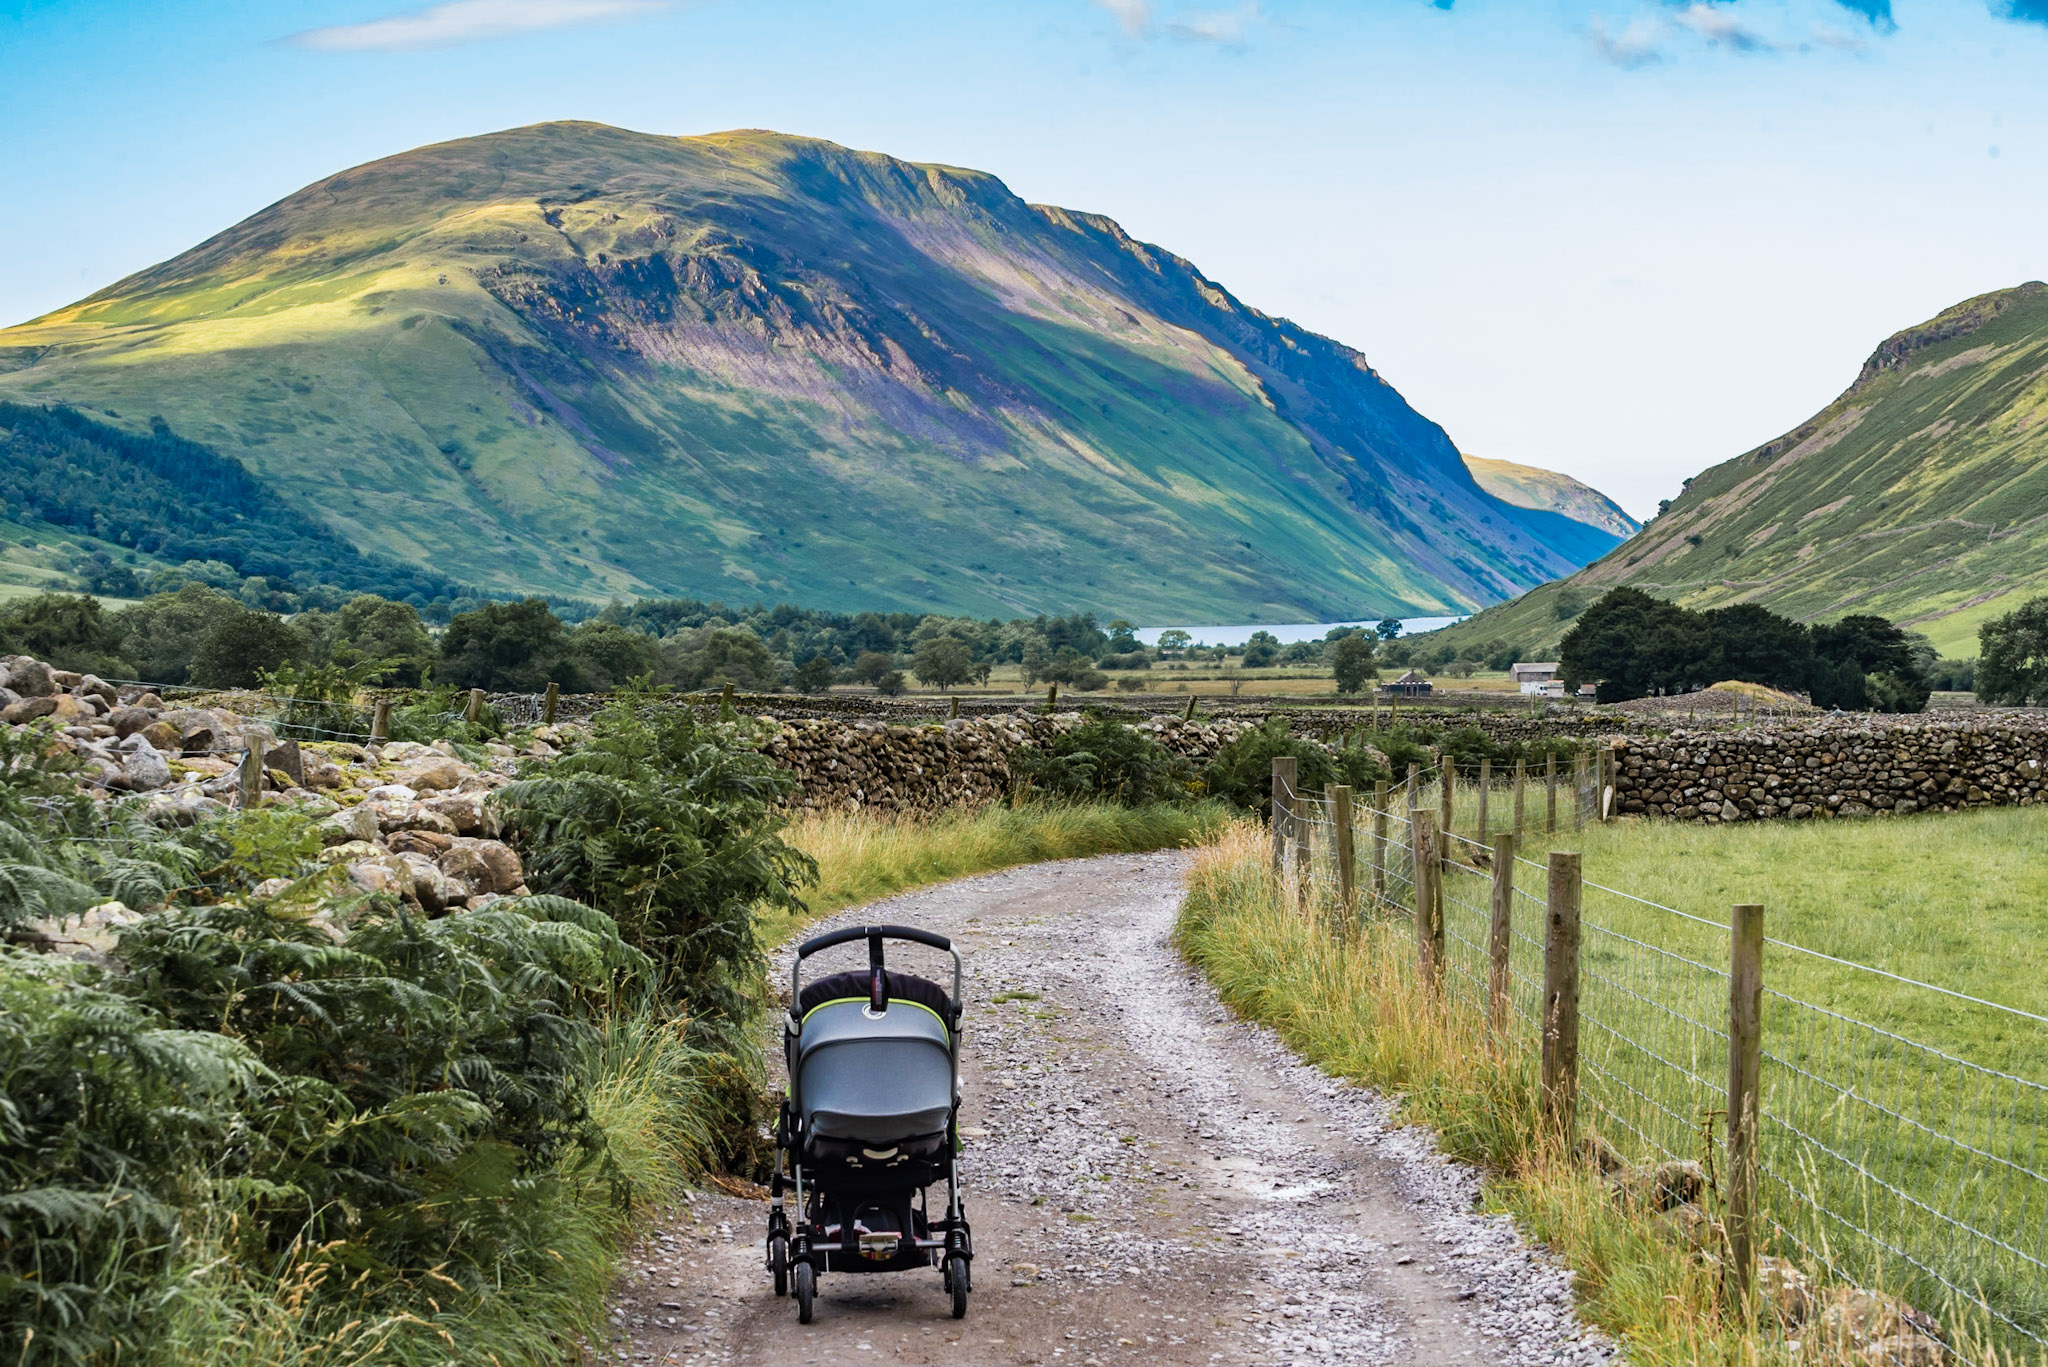 A pushchair with a sleeping baby in it on a country road in the mountains